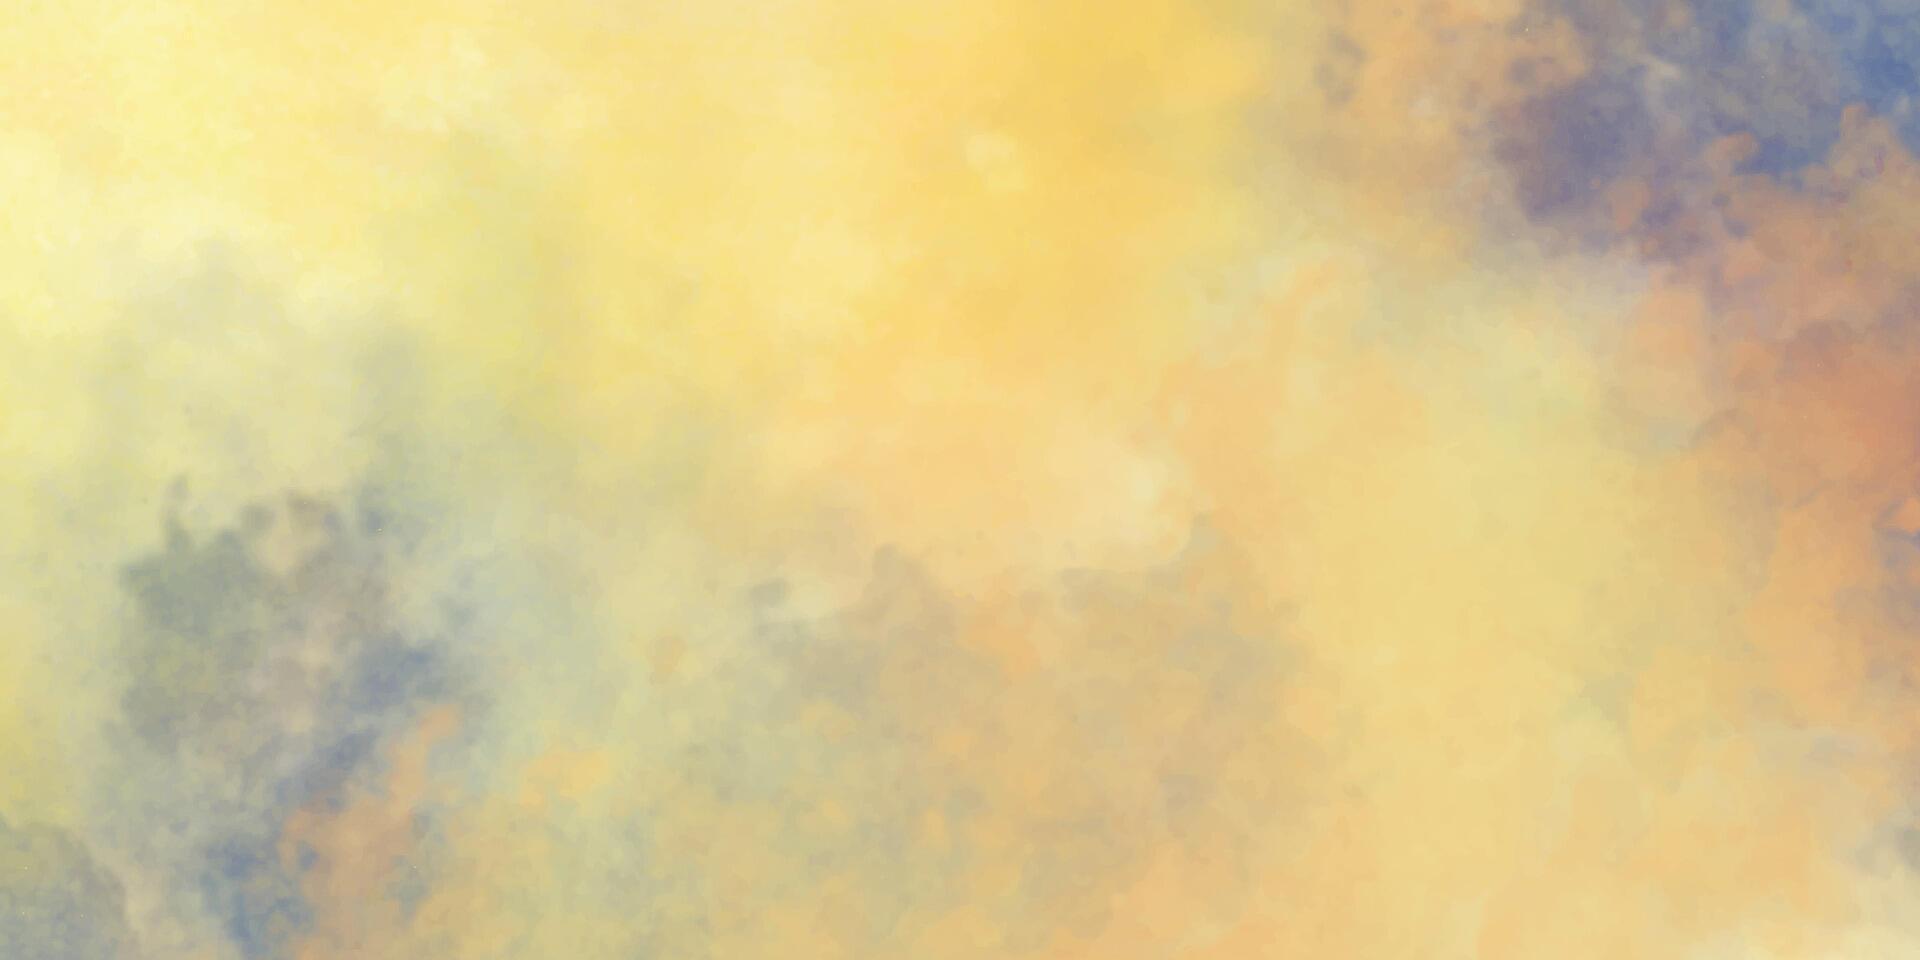 Colorful watercolor background texture. Yellow and blue texture. Abstract grunge texture. Background with yellow colors vector